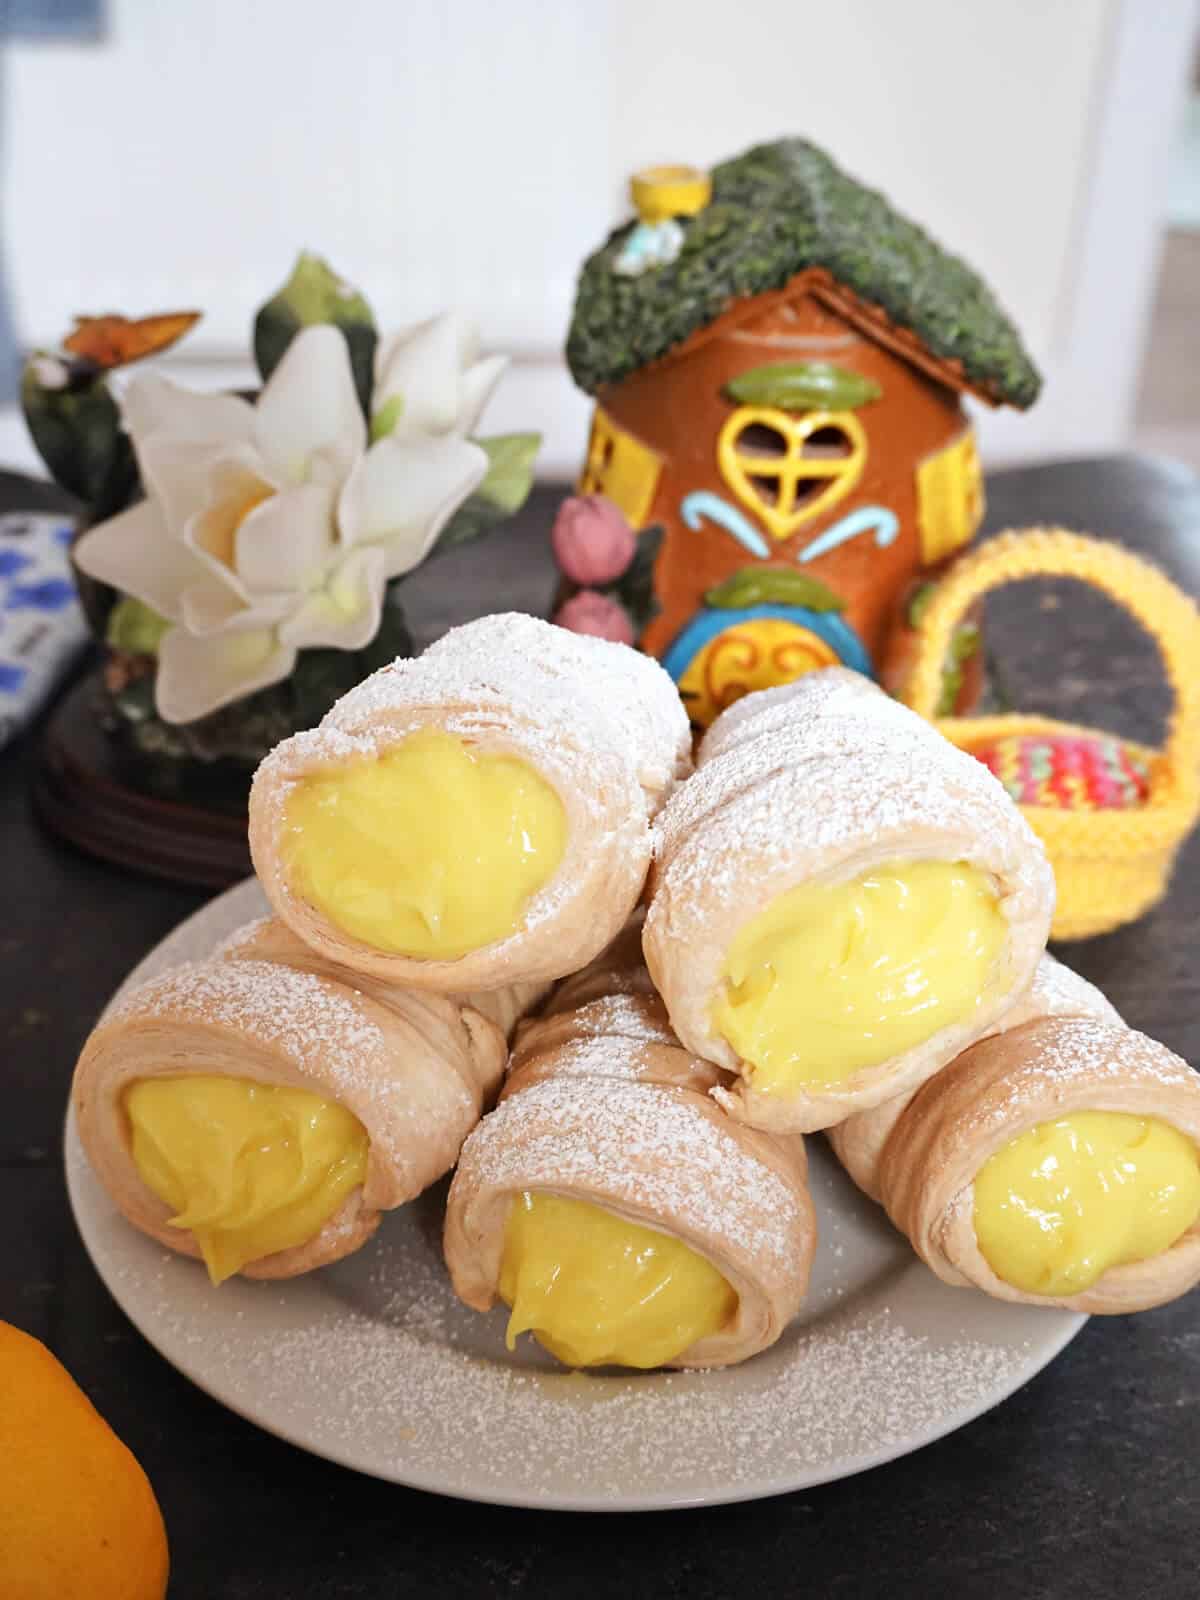 A pile of 5 cream horns on a white plate with decorations in the background